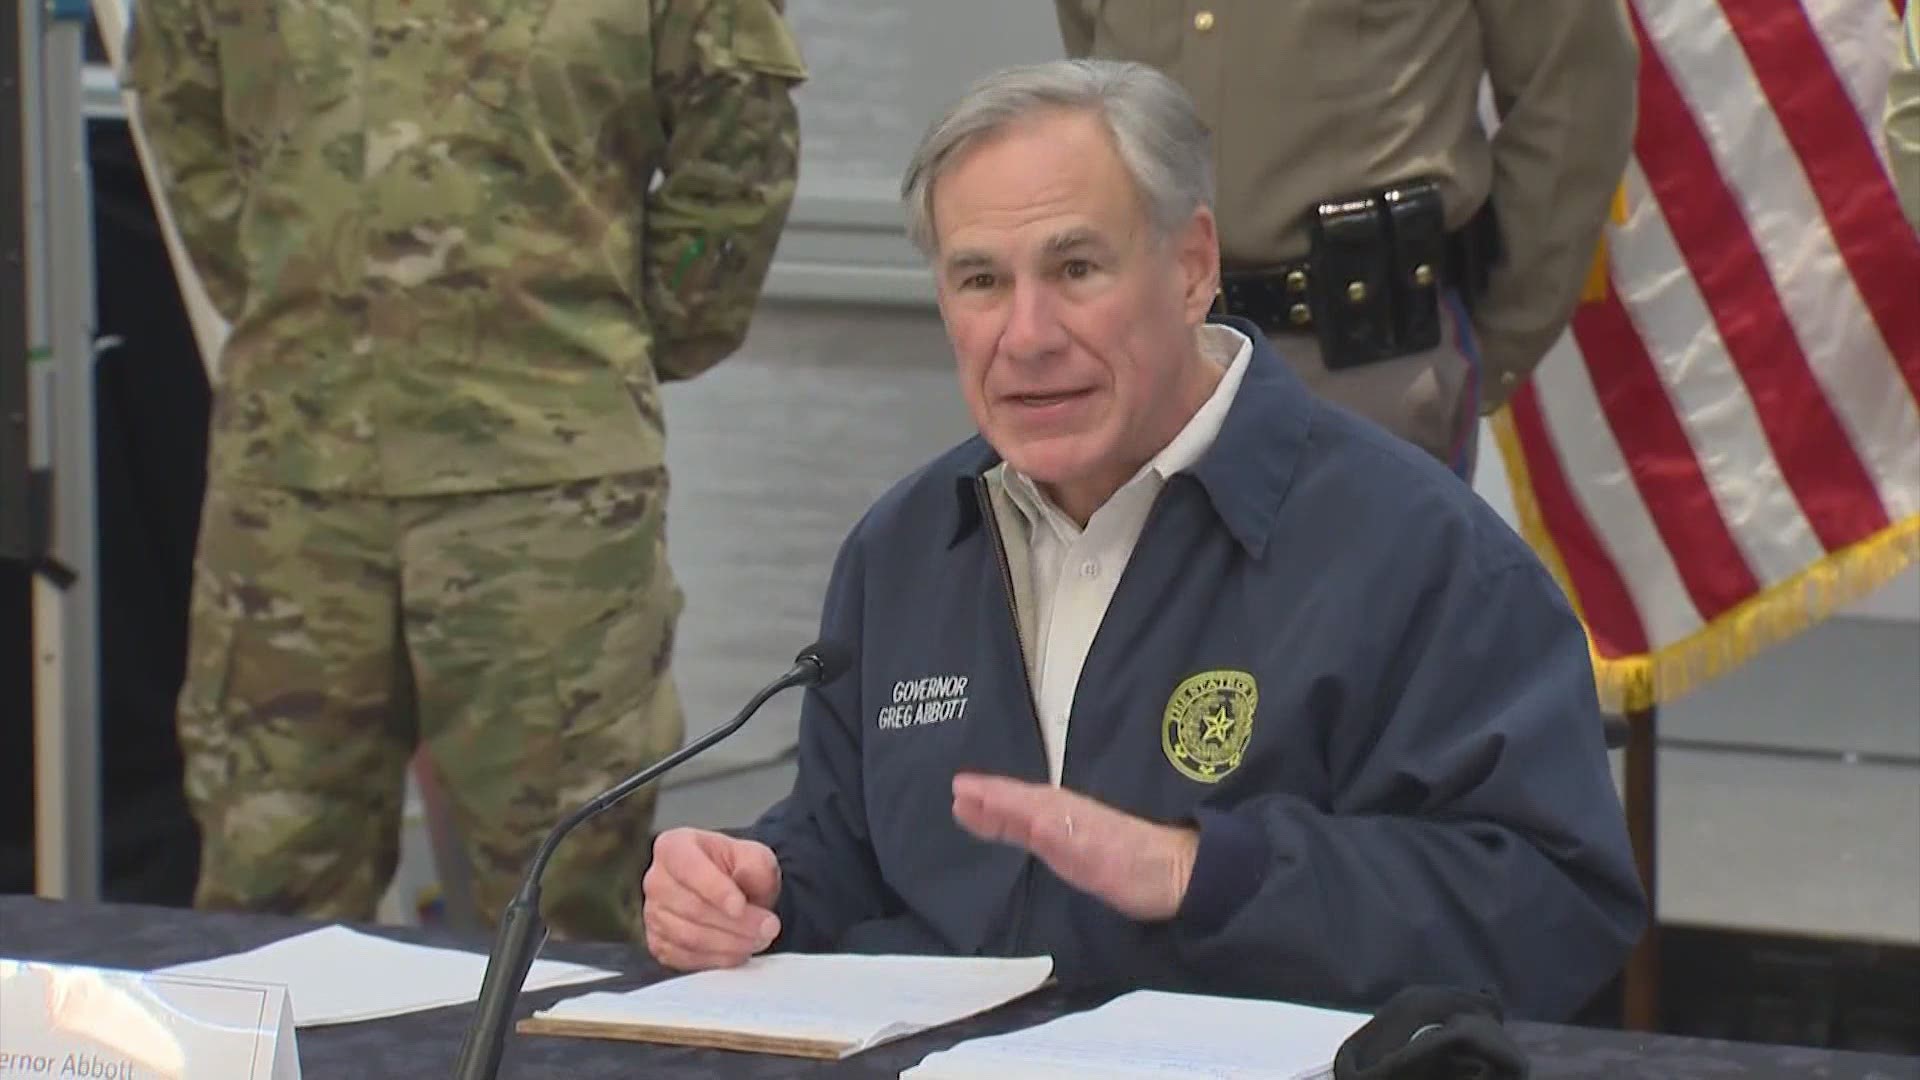 Texas Gov. Greg Abbott on Saturday urged Texans to take the necessary preparations and precautions ahead of severe winter weather that's expected to impact the state